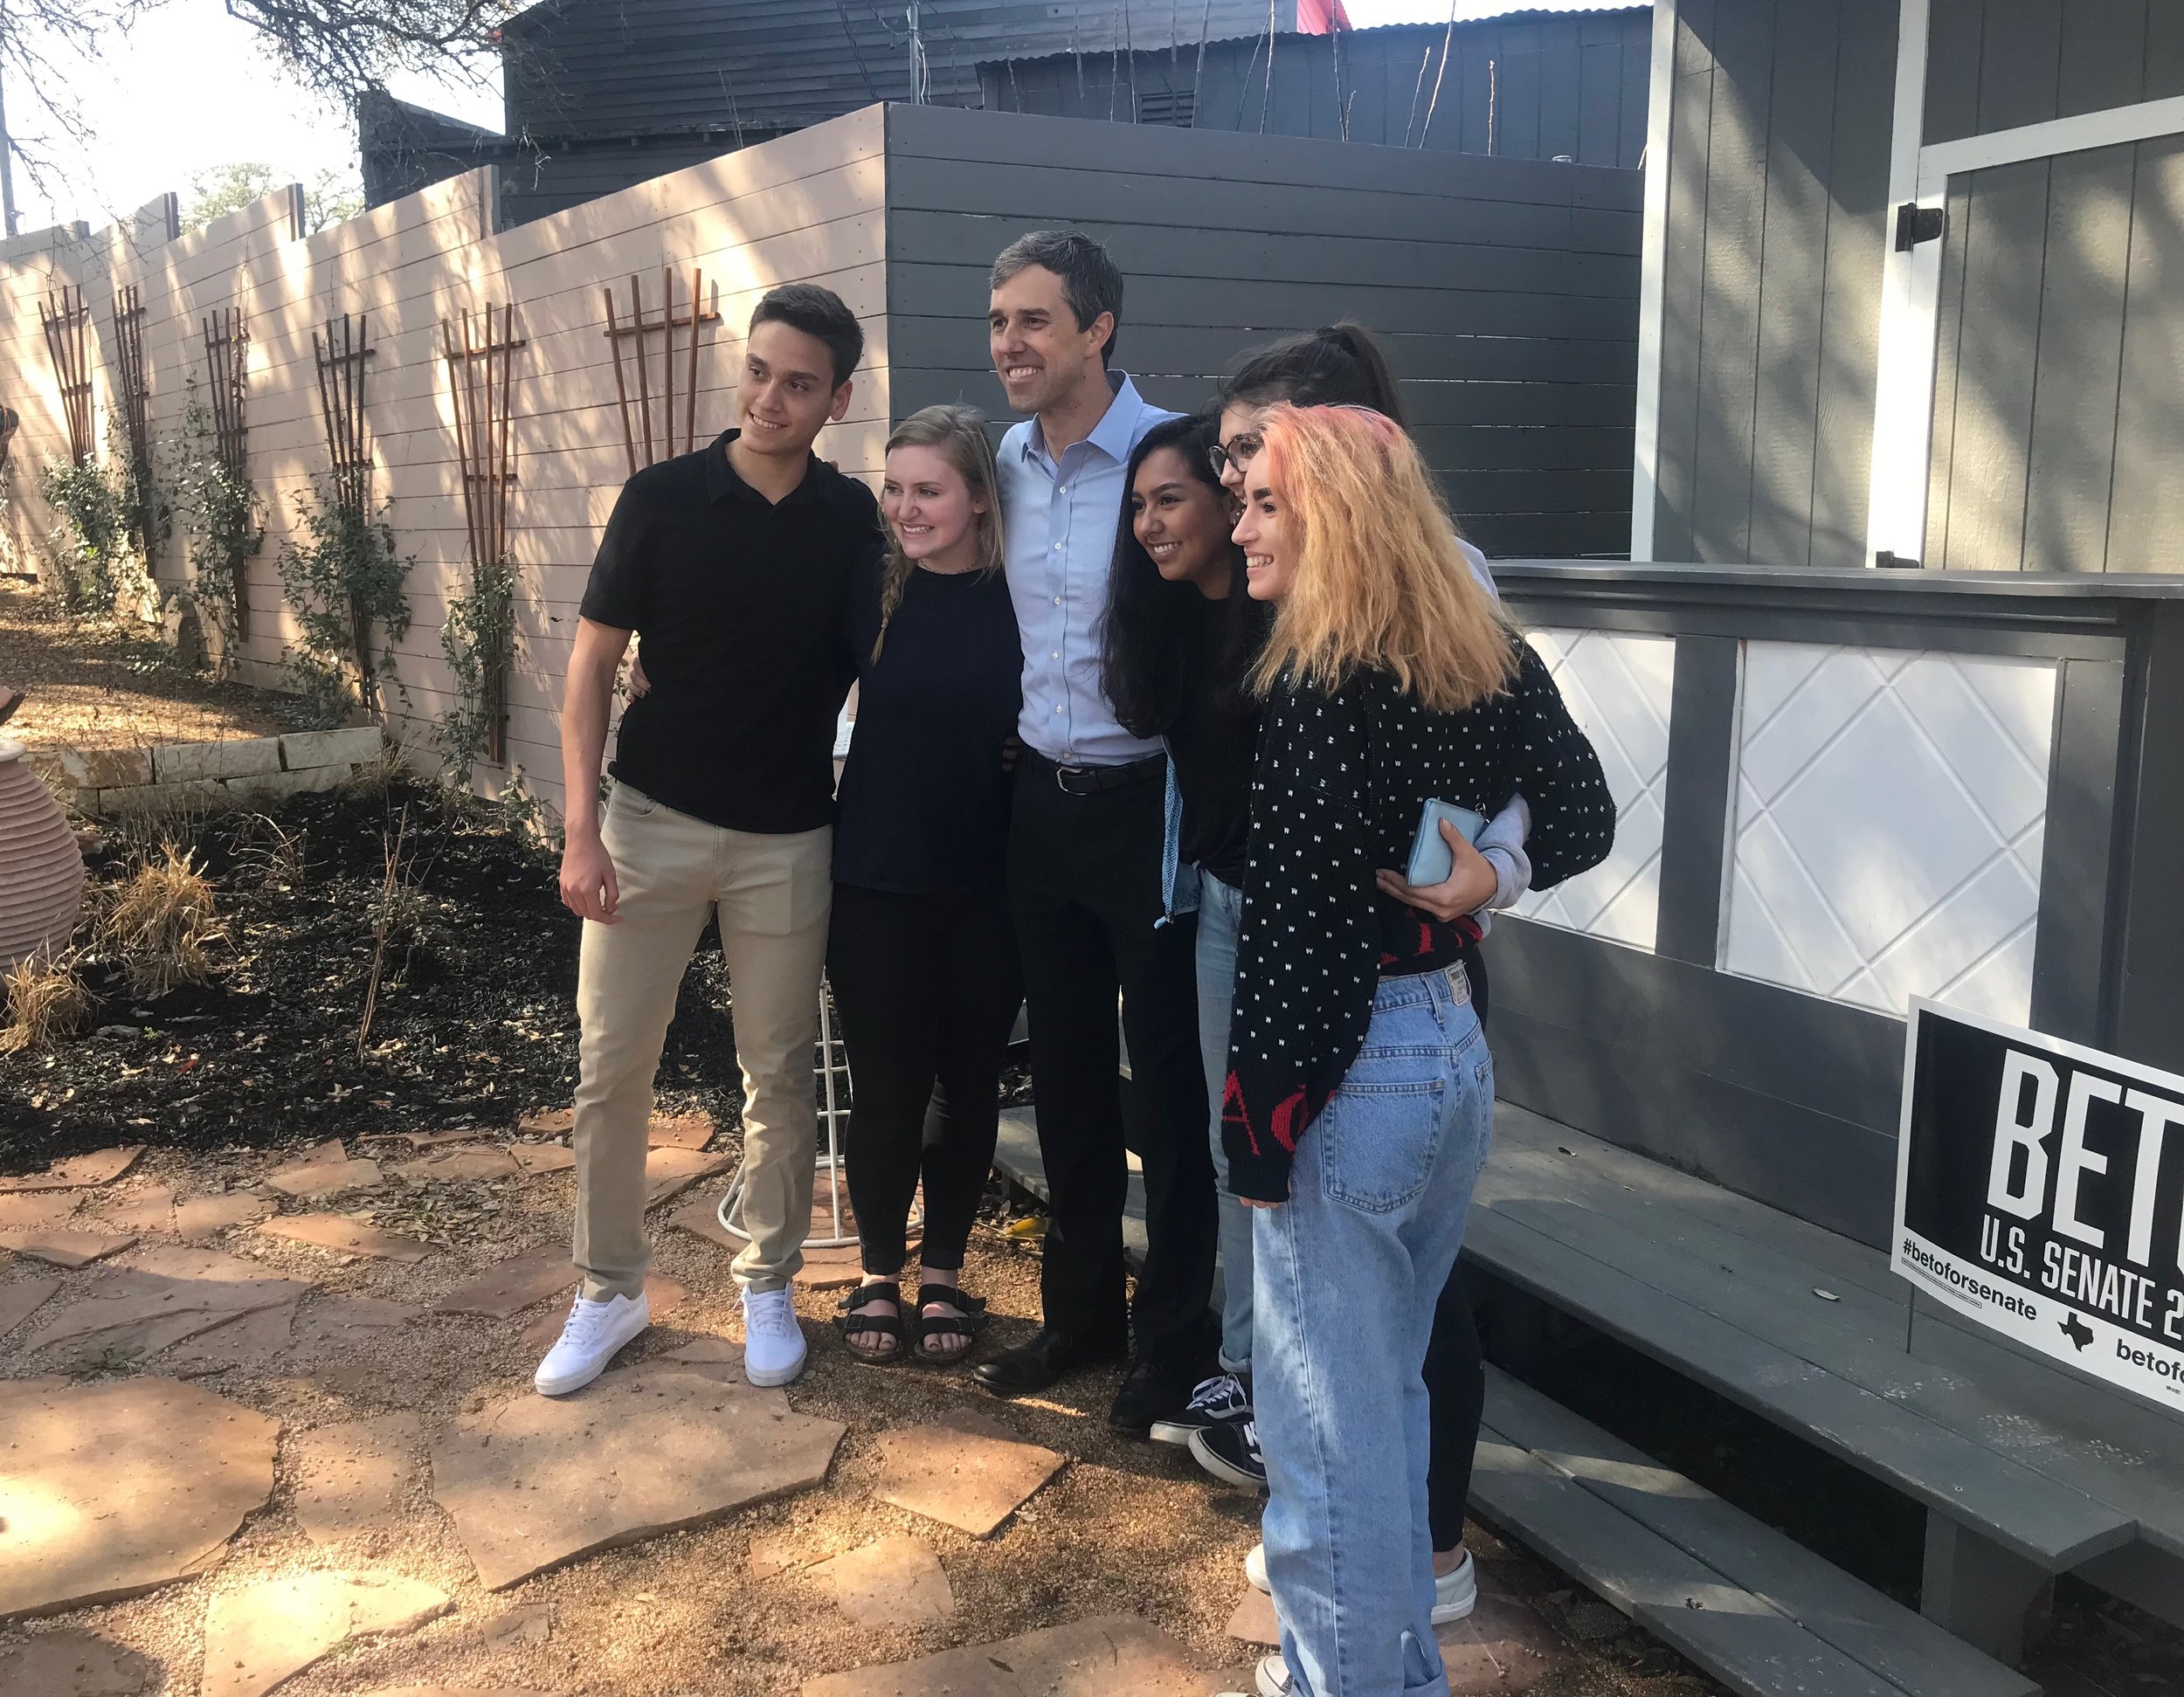  Beto O’Rourke poses with supporters in Richmond, Texas, earlier this year. 